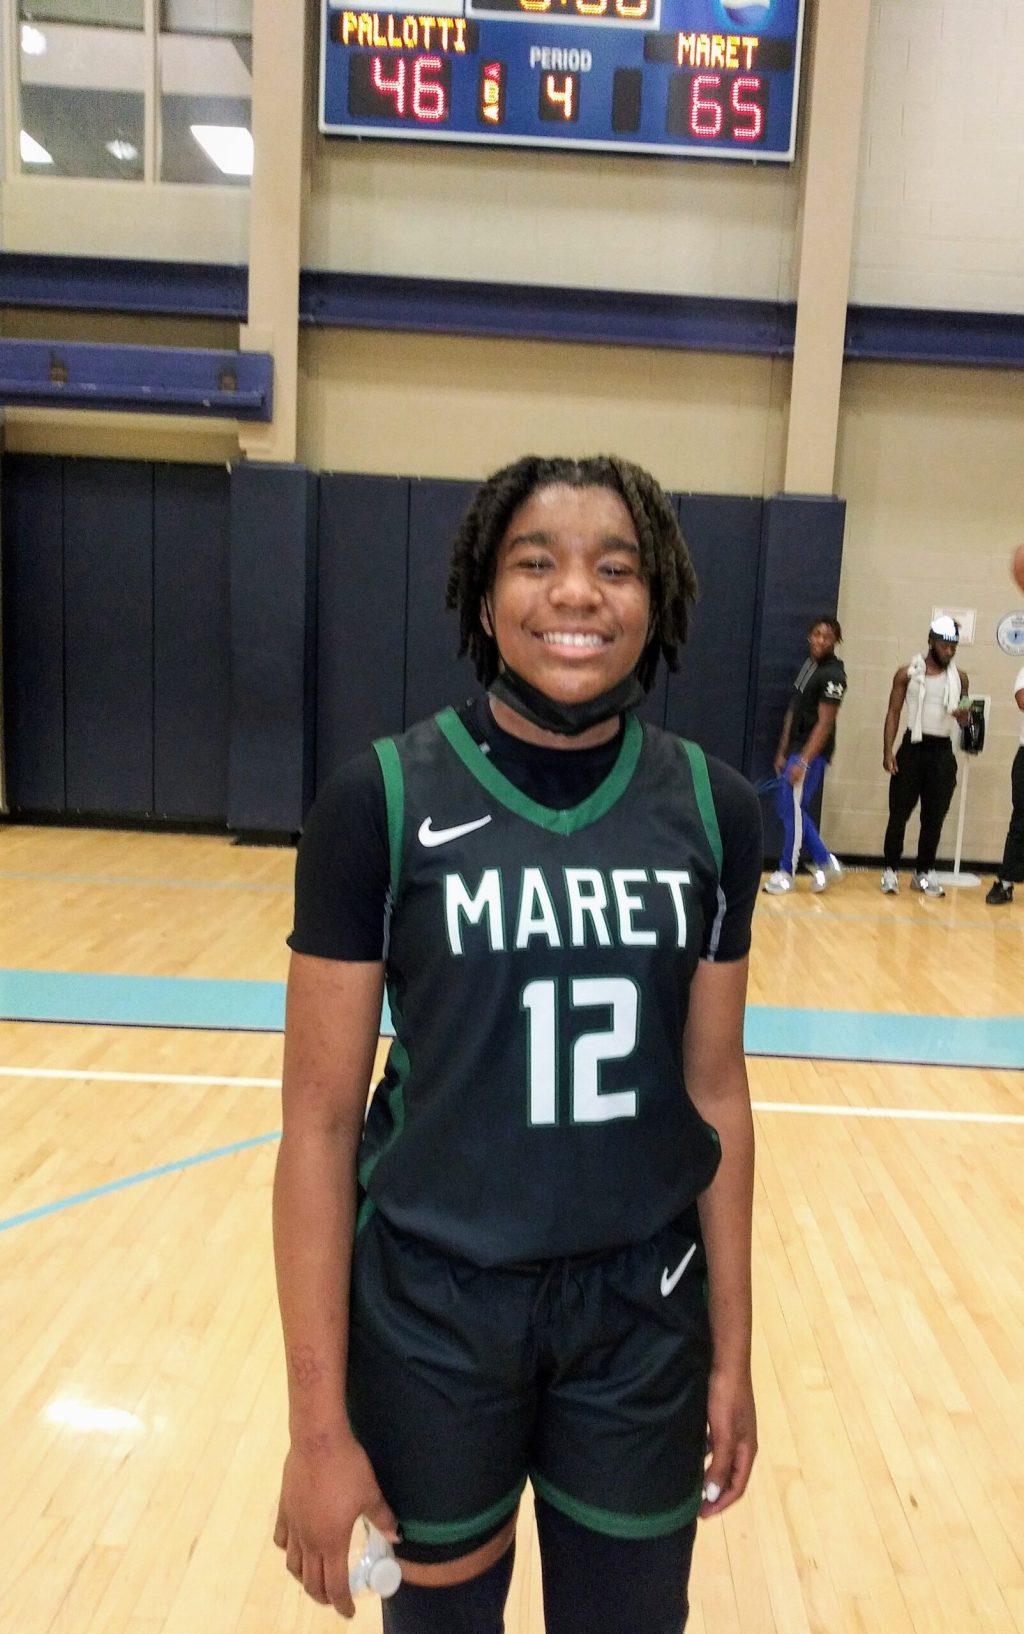 Notes From Maret's Win Over Pallotti